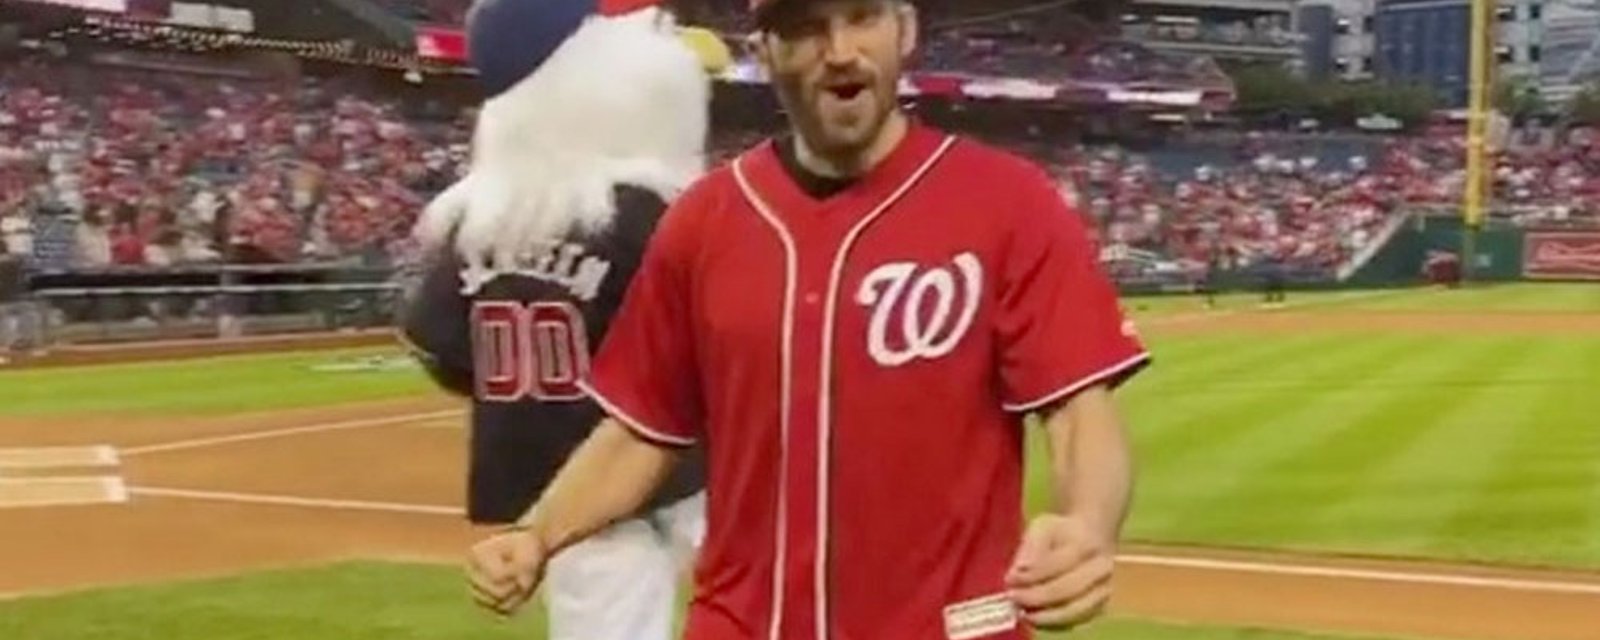 Ovechkin gets the Nationals crowd rocking with first pitch before Game 4